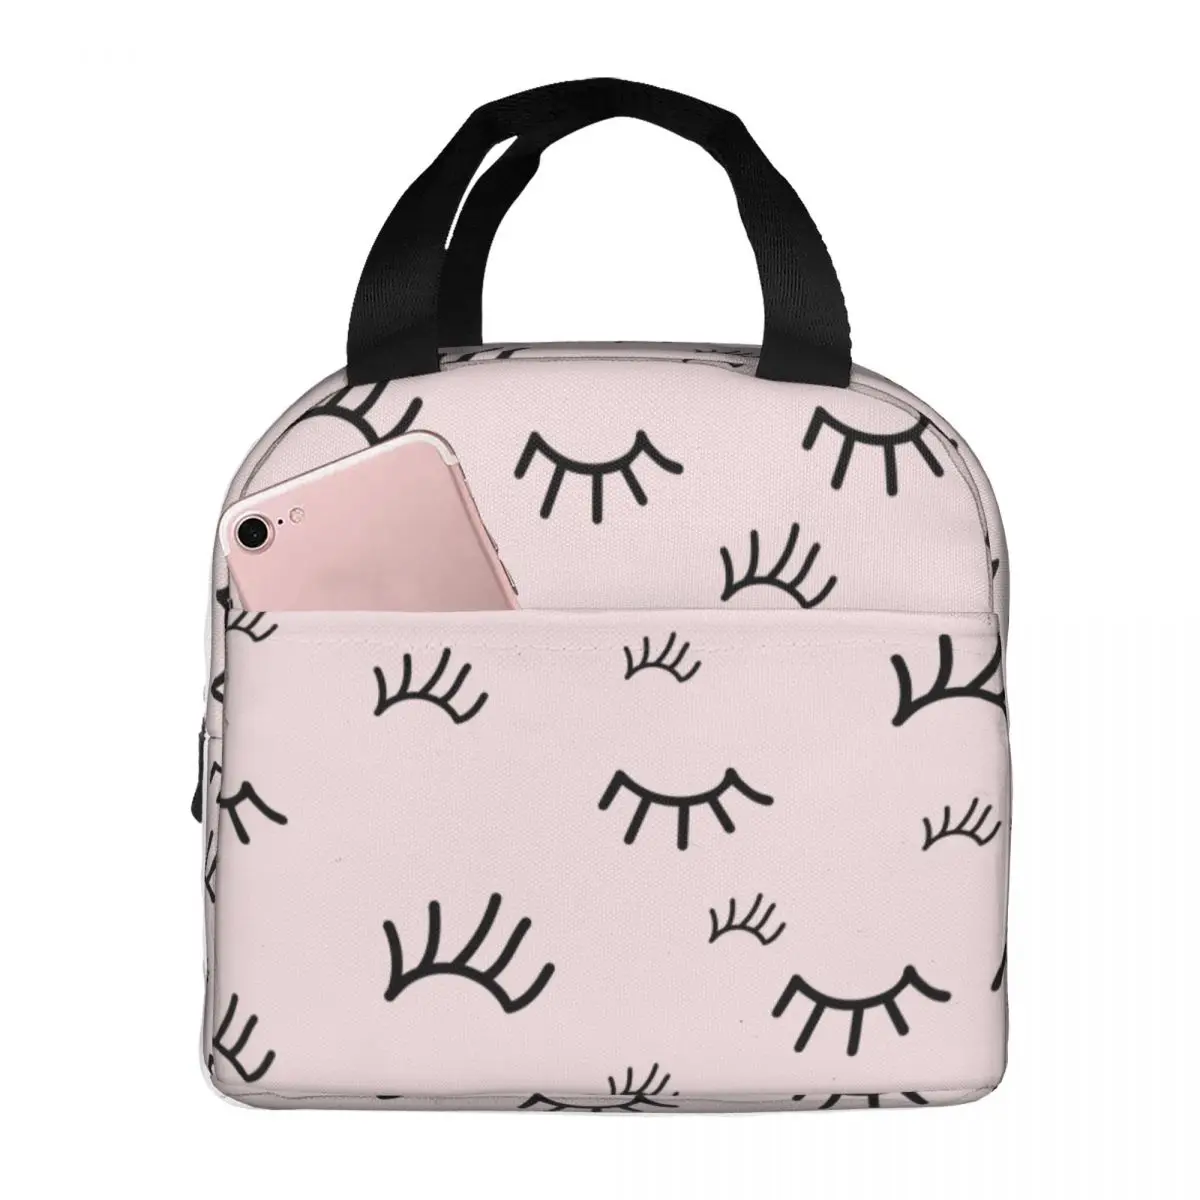 Lunch Bag for Women Kids Eyelash Pink Thermal Cooler Picnic Cartoon Beauty Glam Closed Eyes Canvas Lunch Box Food Storage Bags